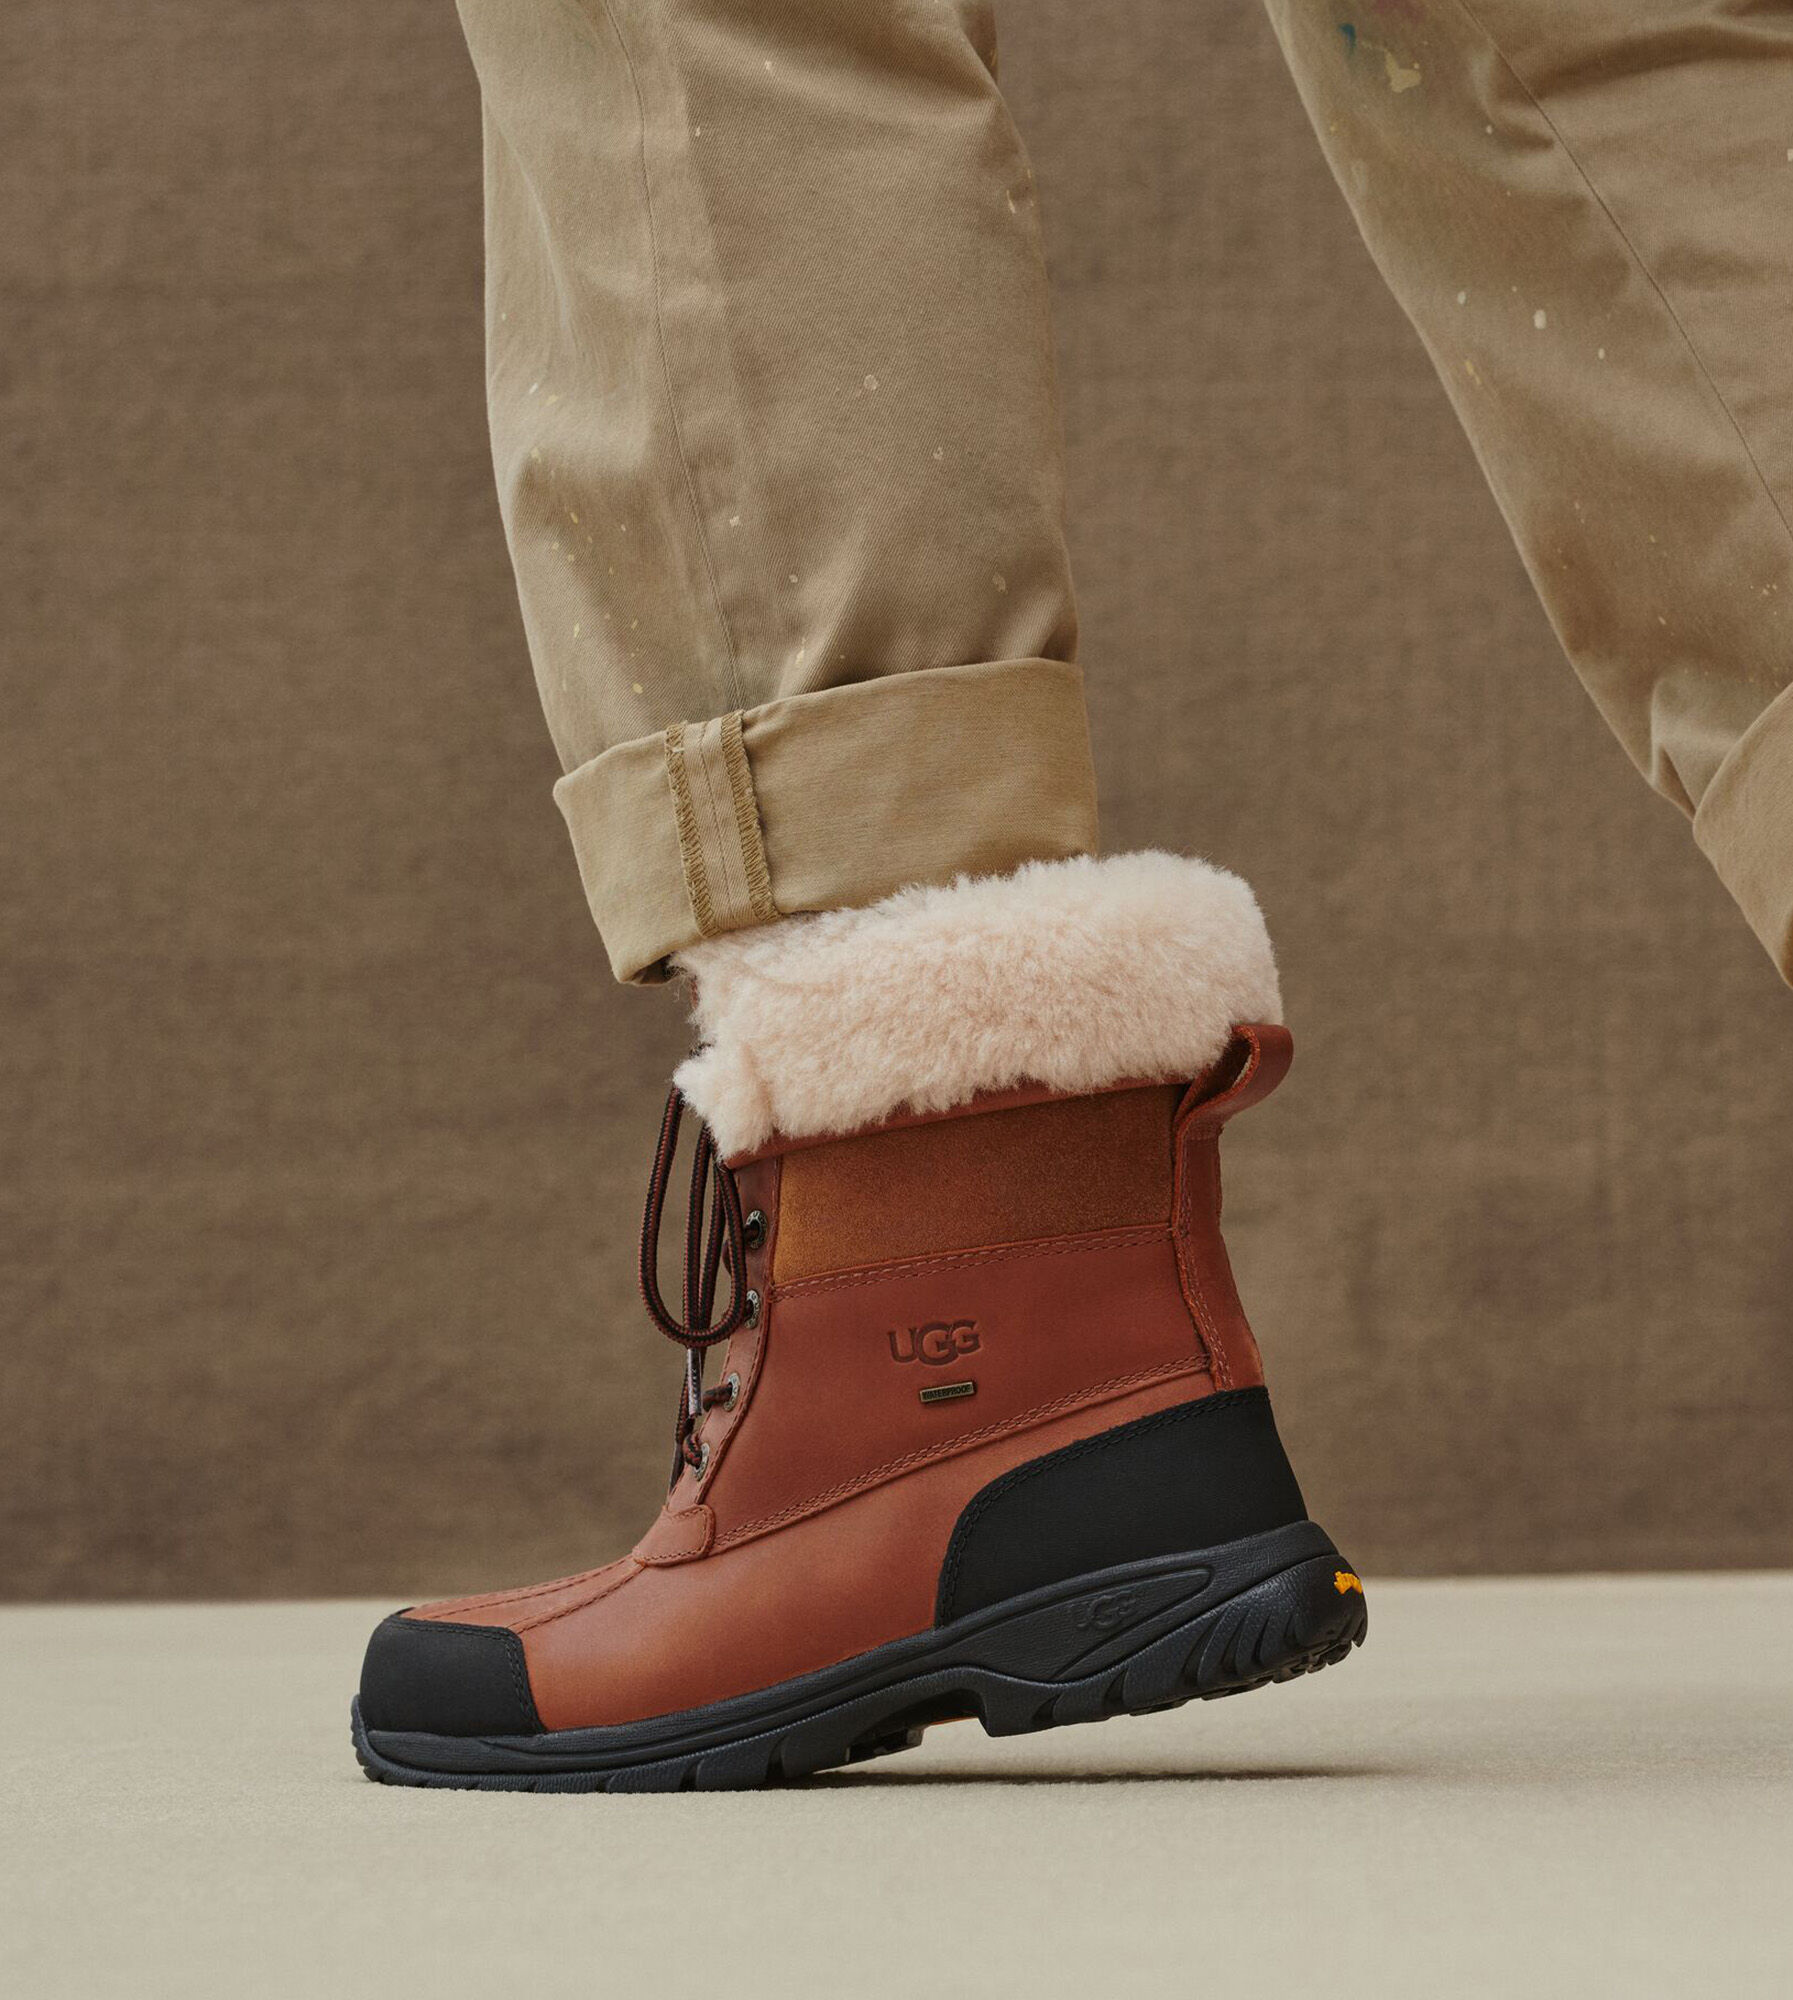 ugg boots weather protection